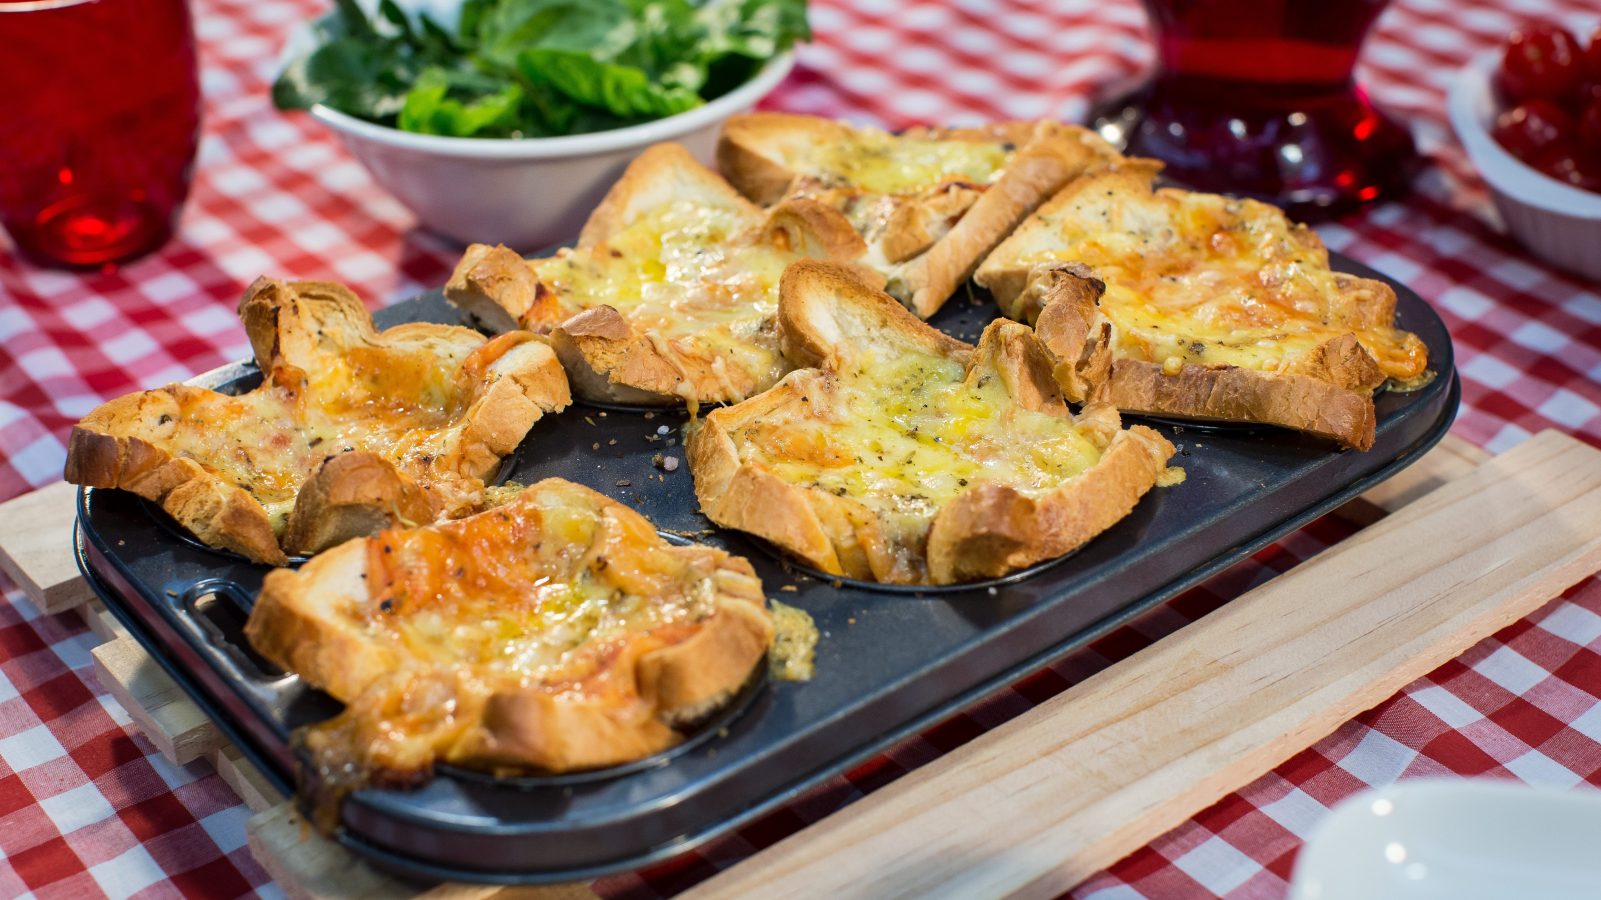 Six hole muffin tin full of bread cups, green salad on red & white tablecloth with red glasses.